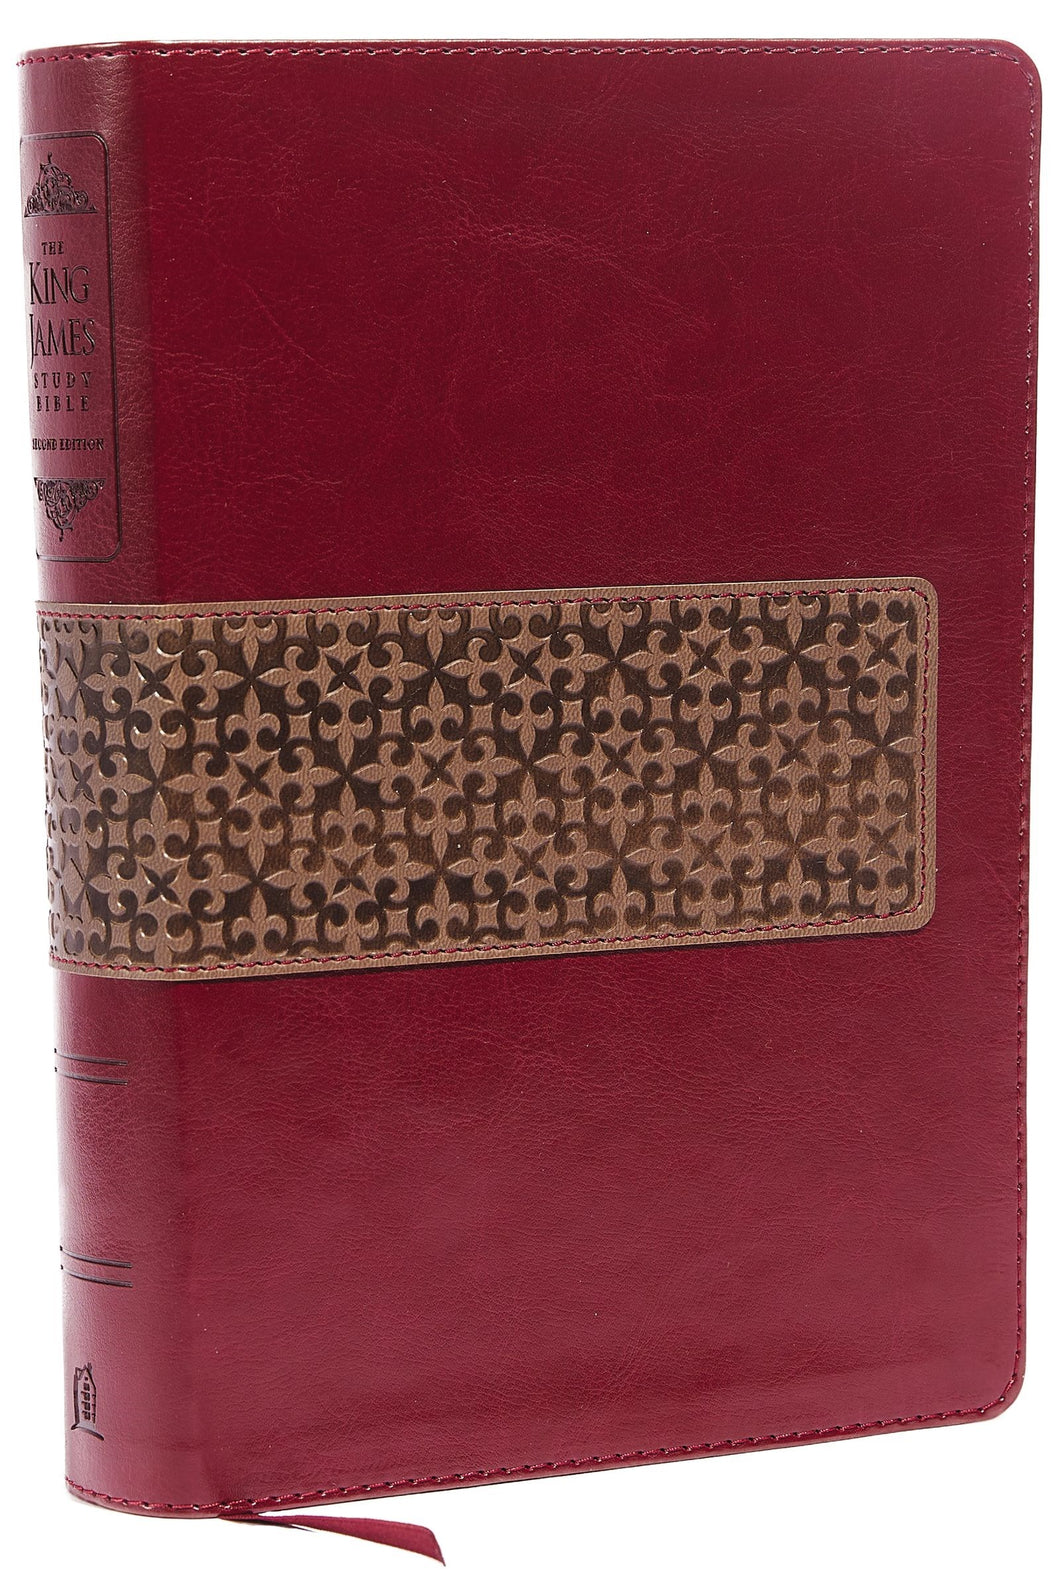 KJV King James Study Bible (Second Edition)-Rich Ruby/Warm Taupe LeatherSoft Indexed